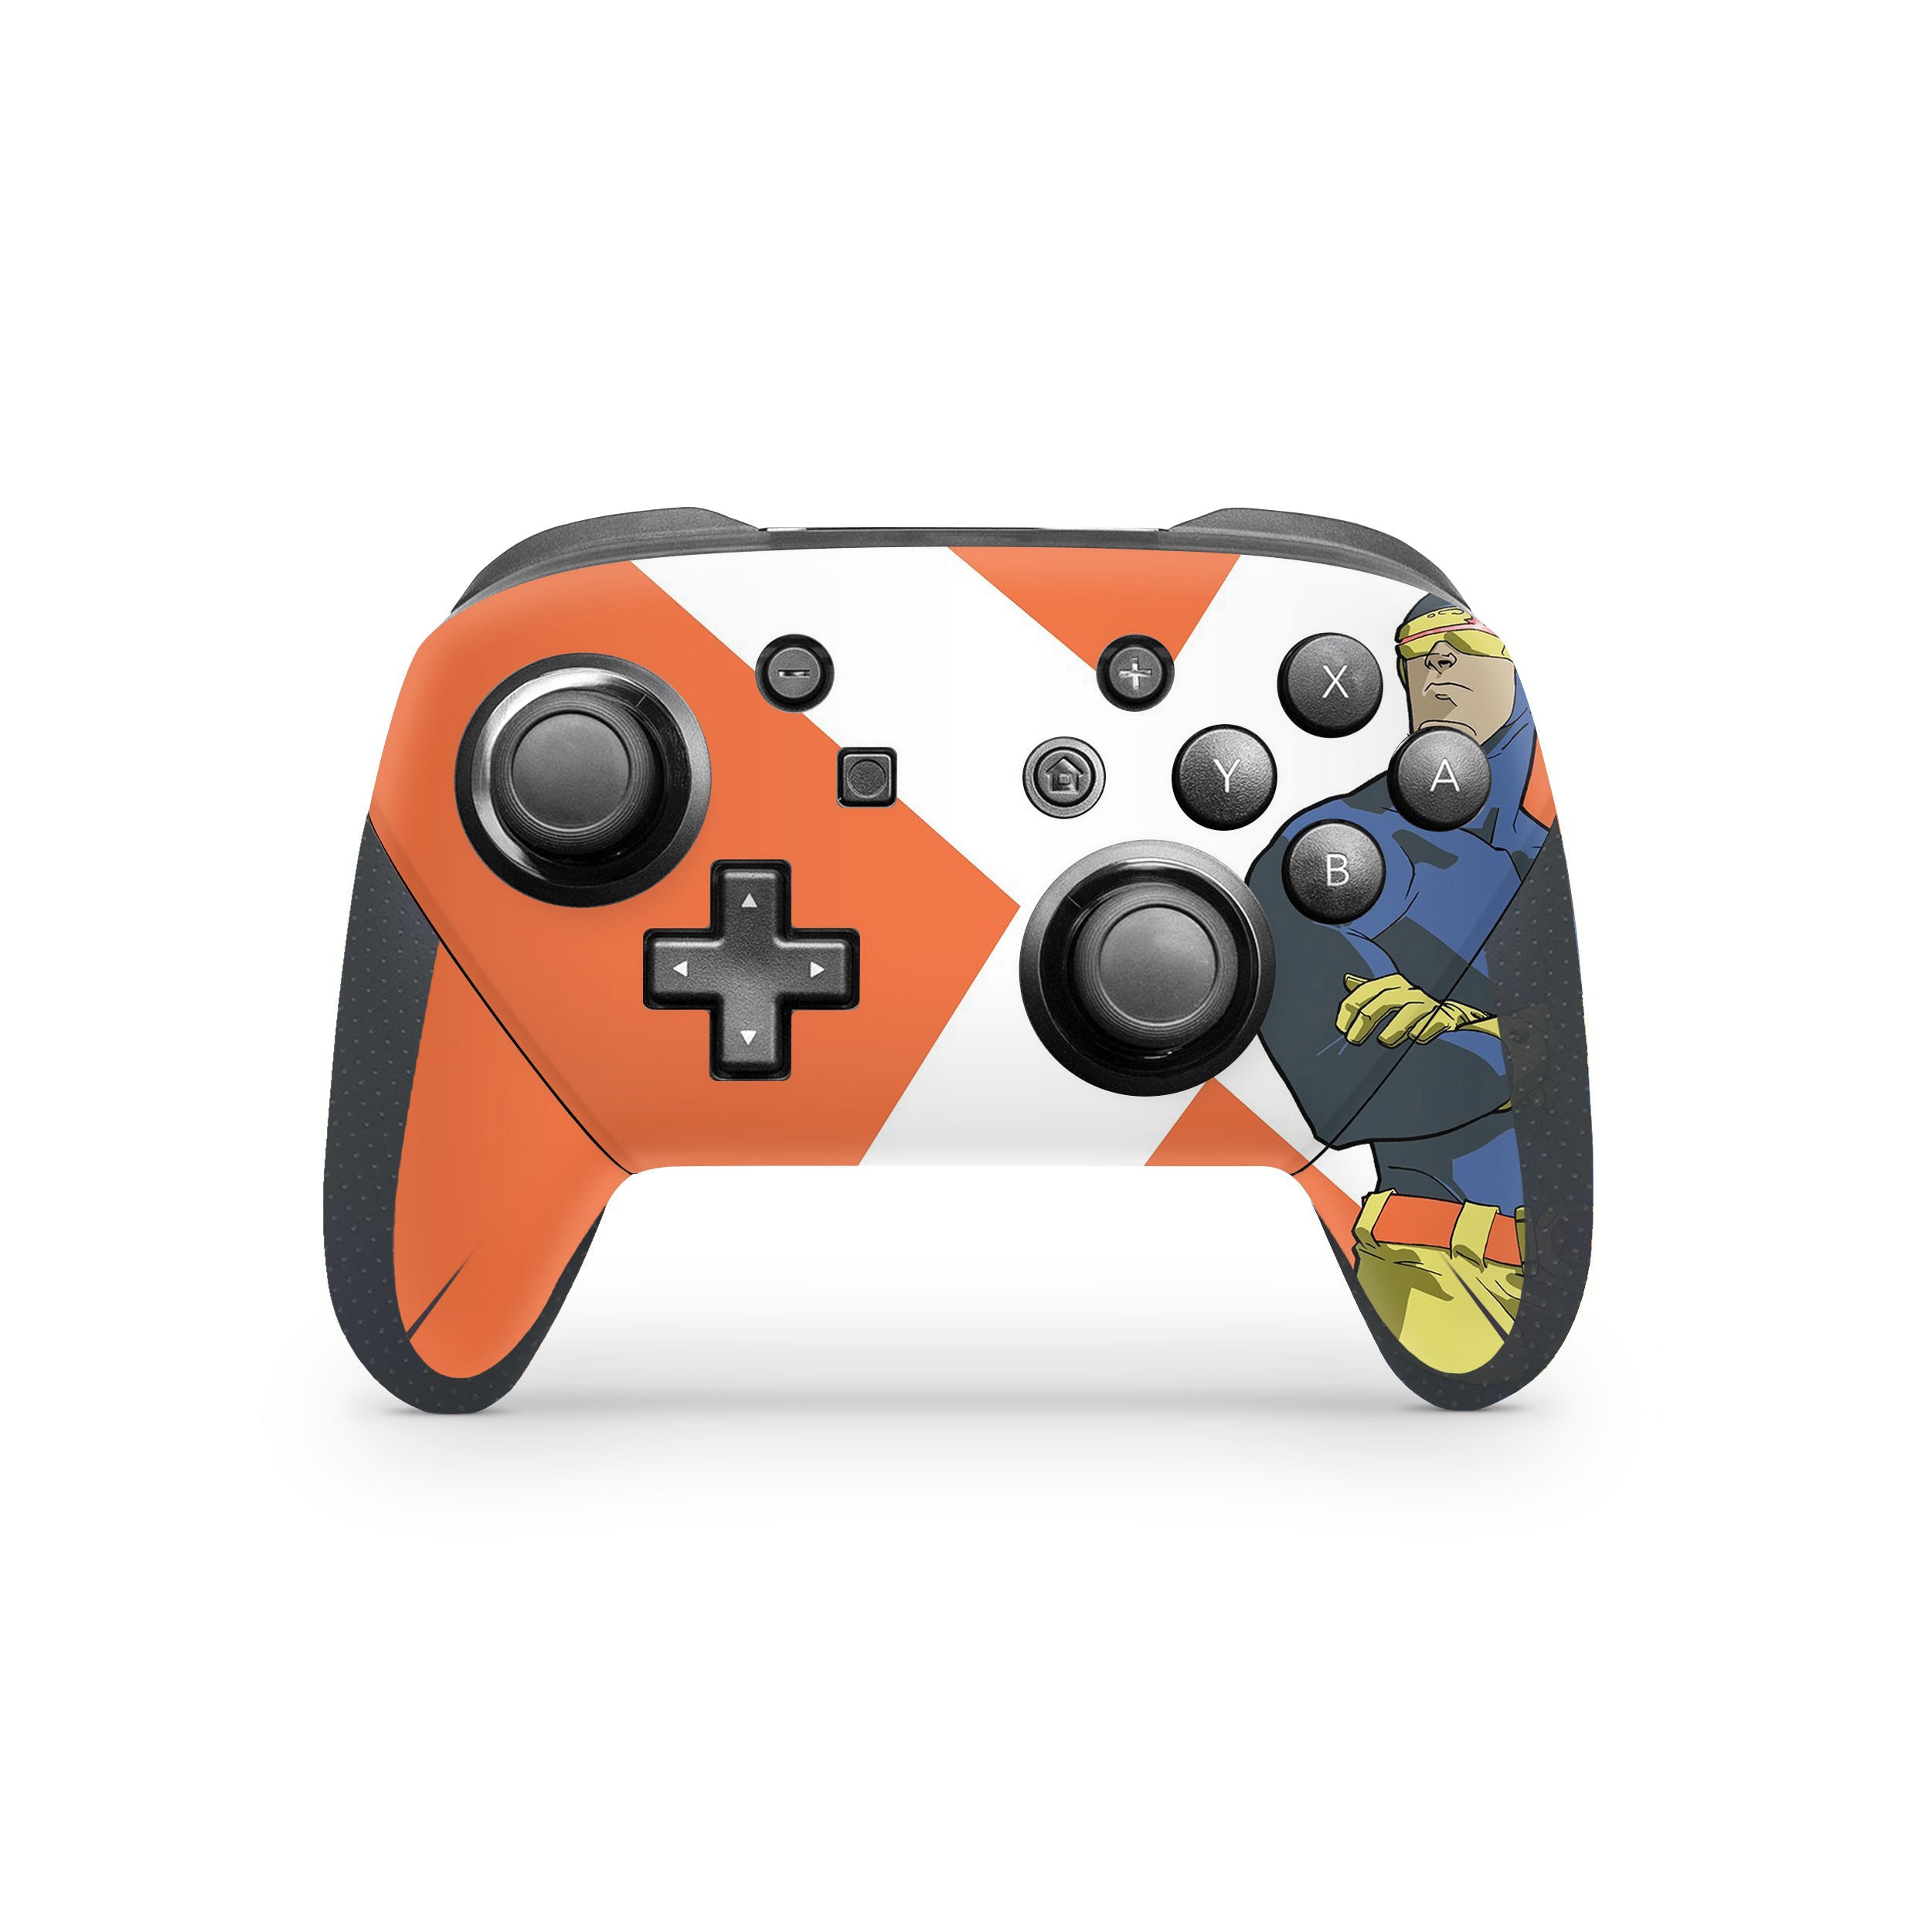 A video game skin featuring a Marvel Comics X Men Cyclops design for the Switch Pro Controller.